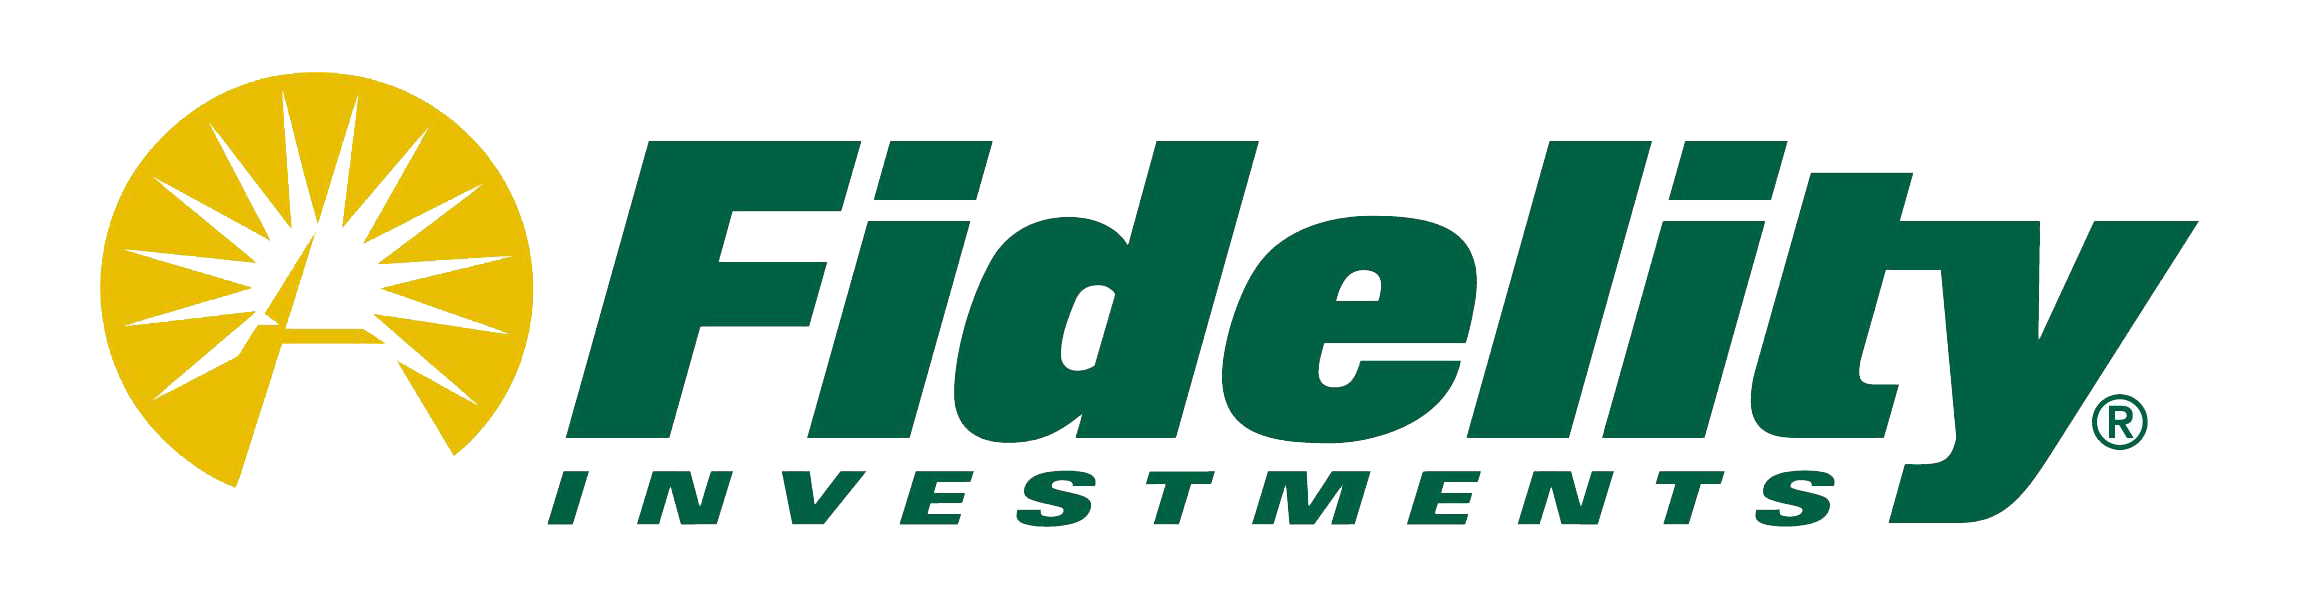 Fidelity Company Logo - Fidelity Logo, Fidelity Symbol, Meaning, History and Evolution